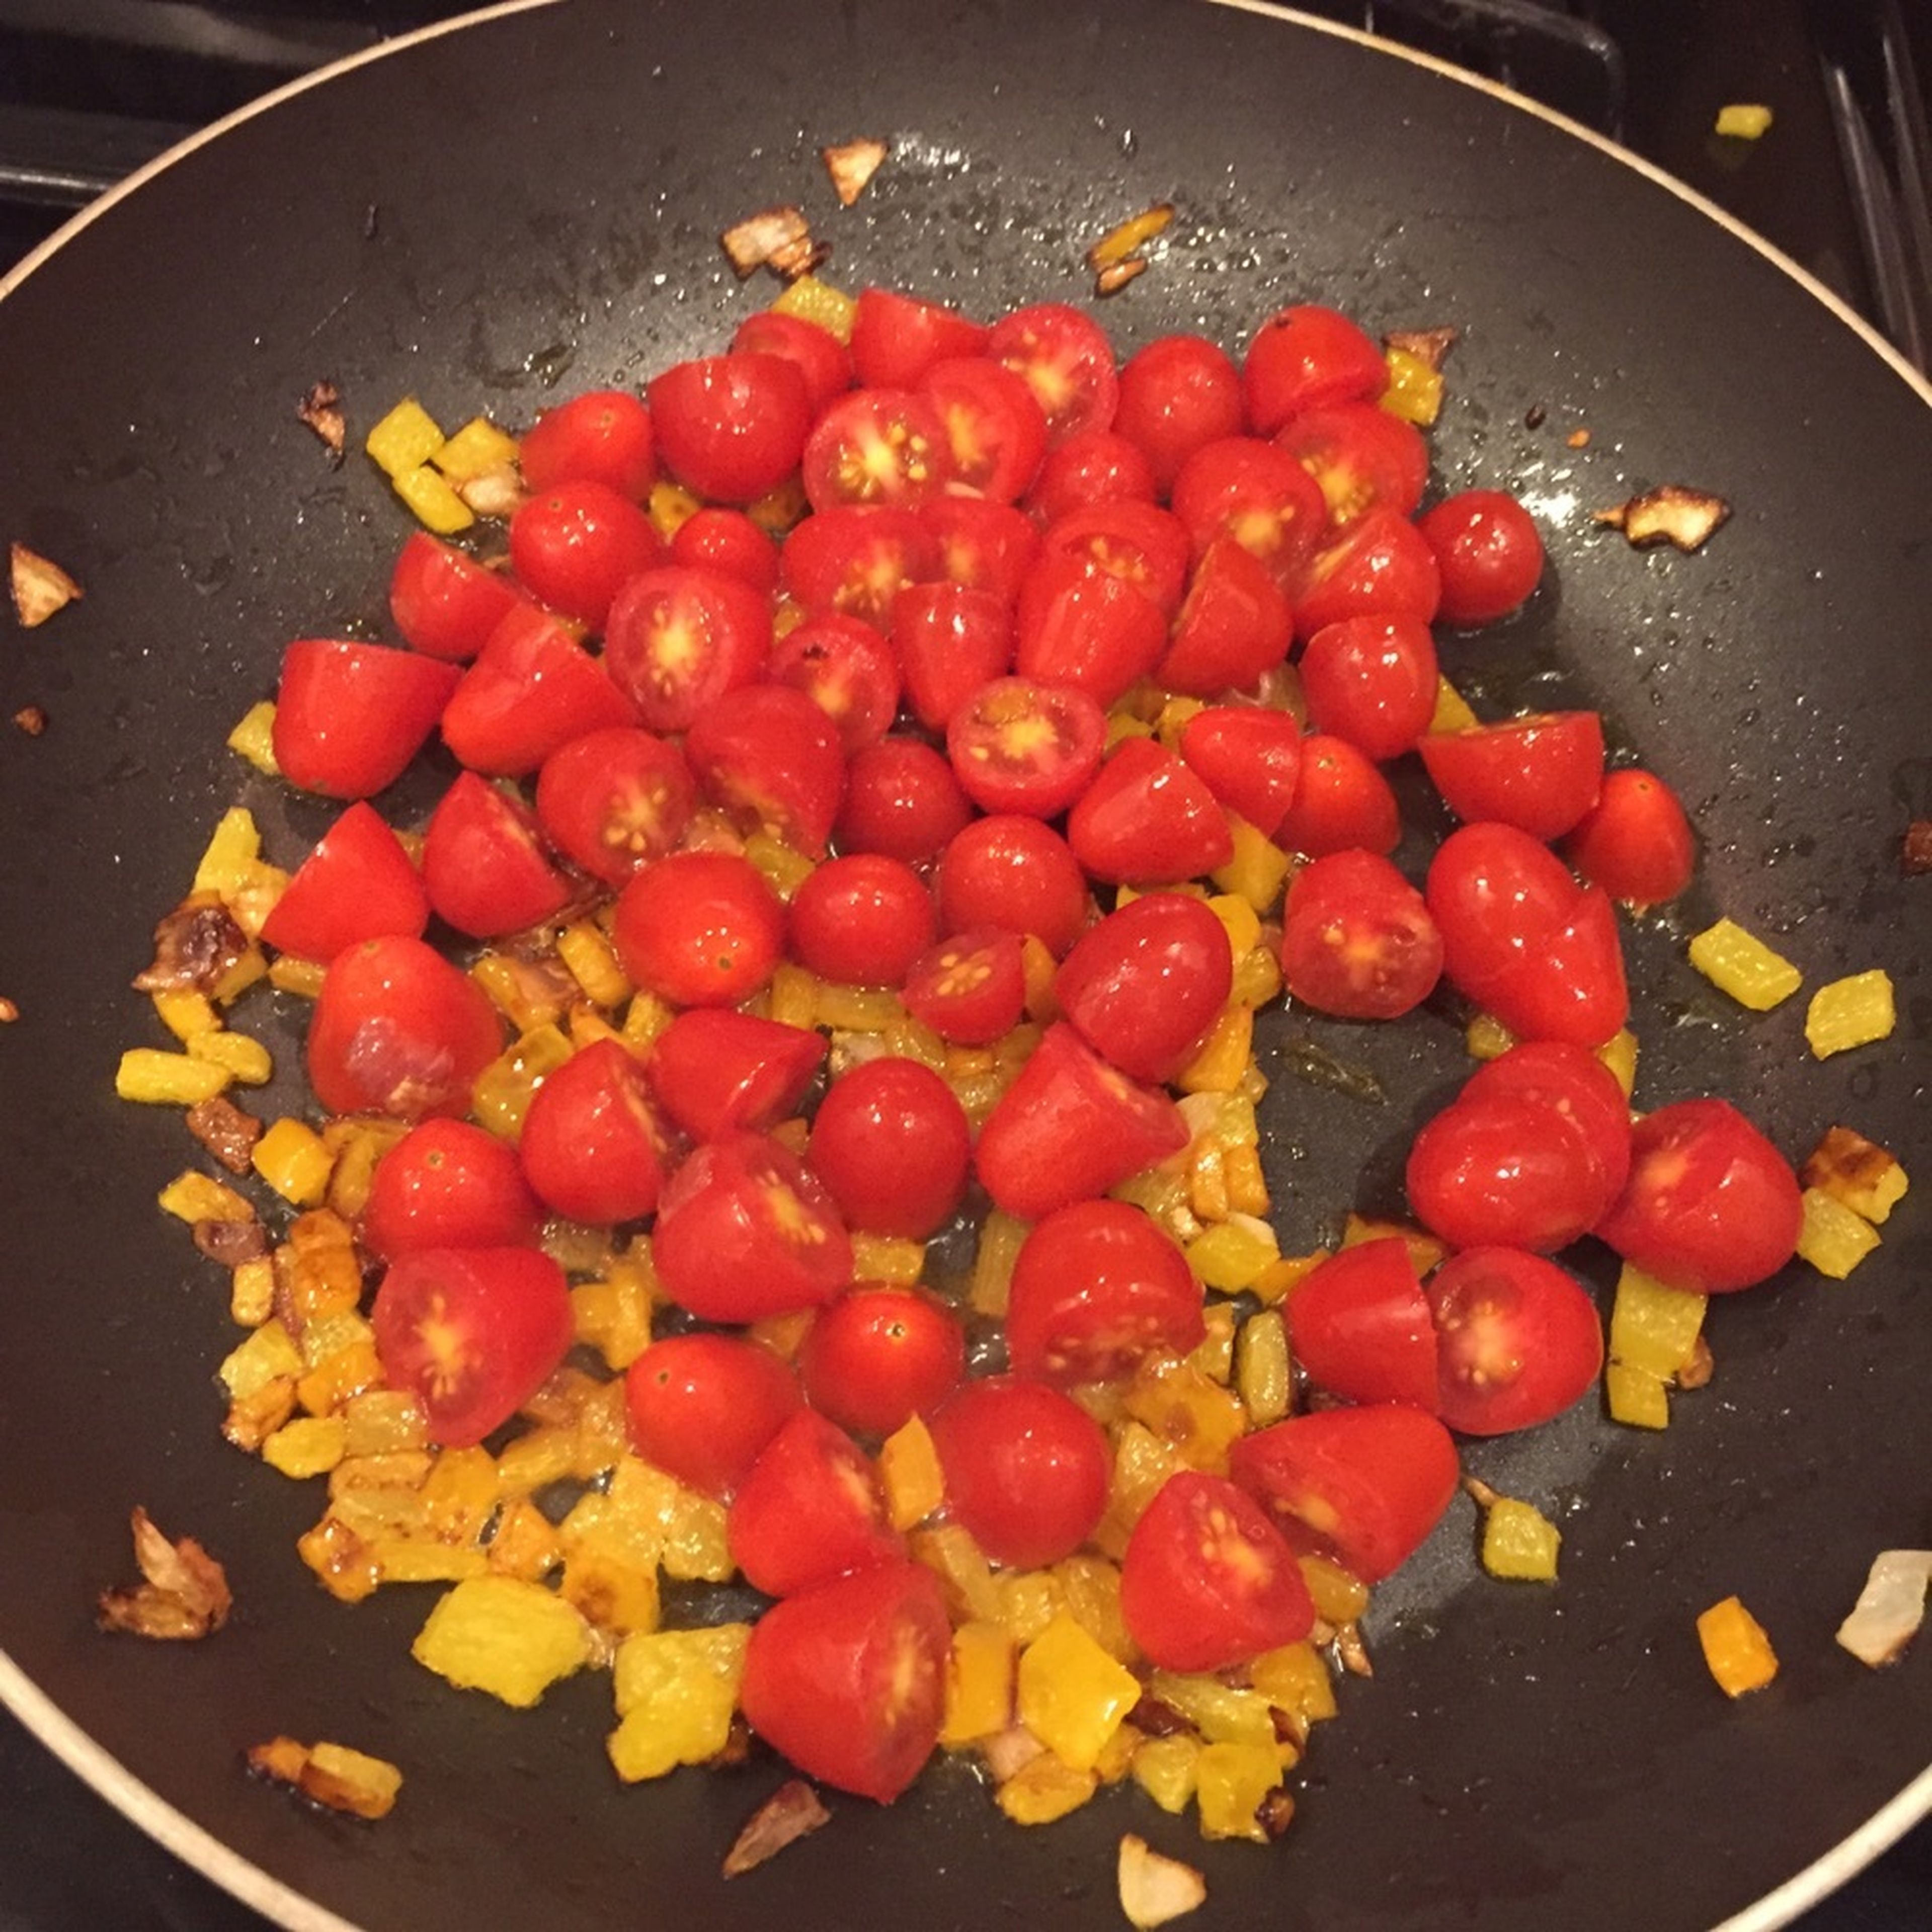 Add tomatoes and fry until they are softened and their juices begin to release.